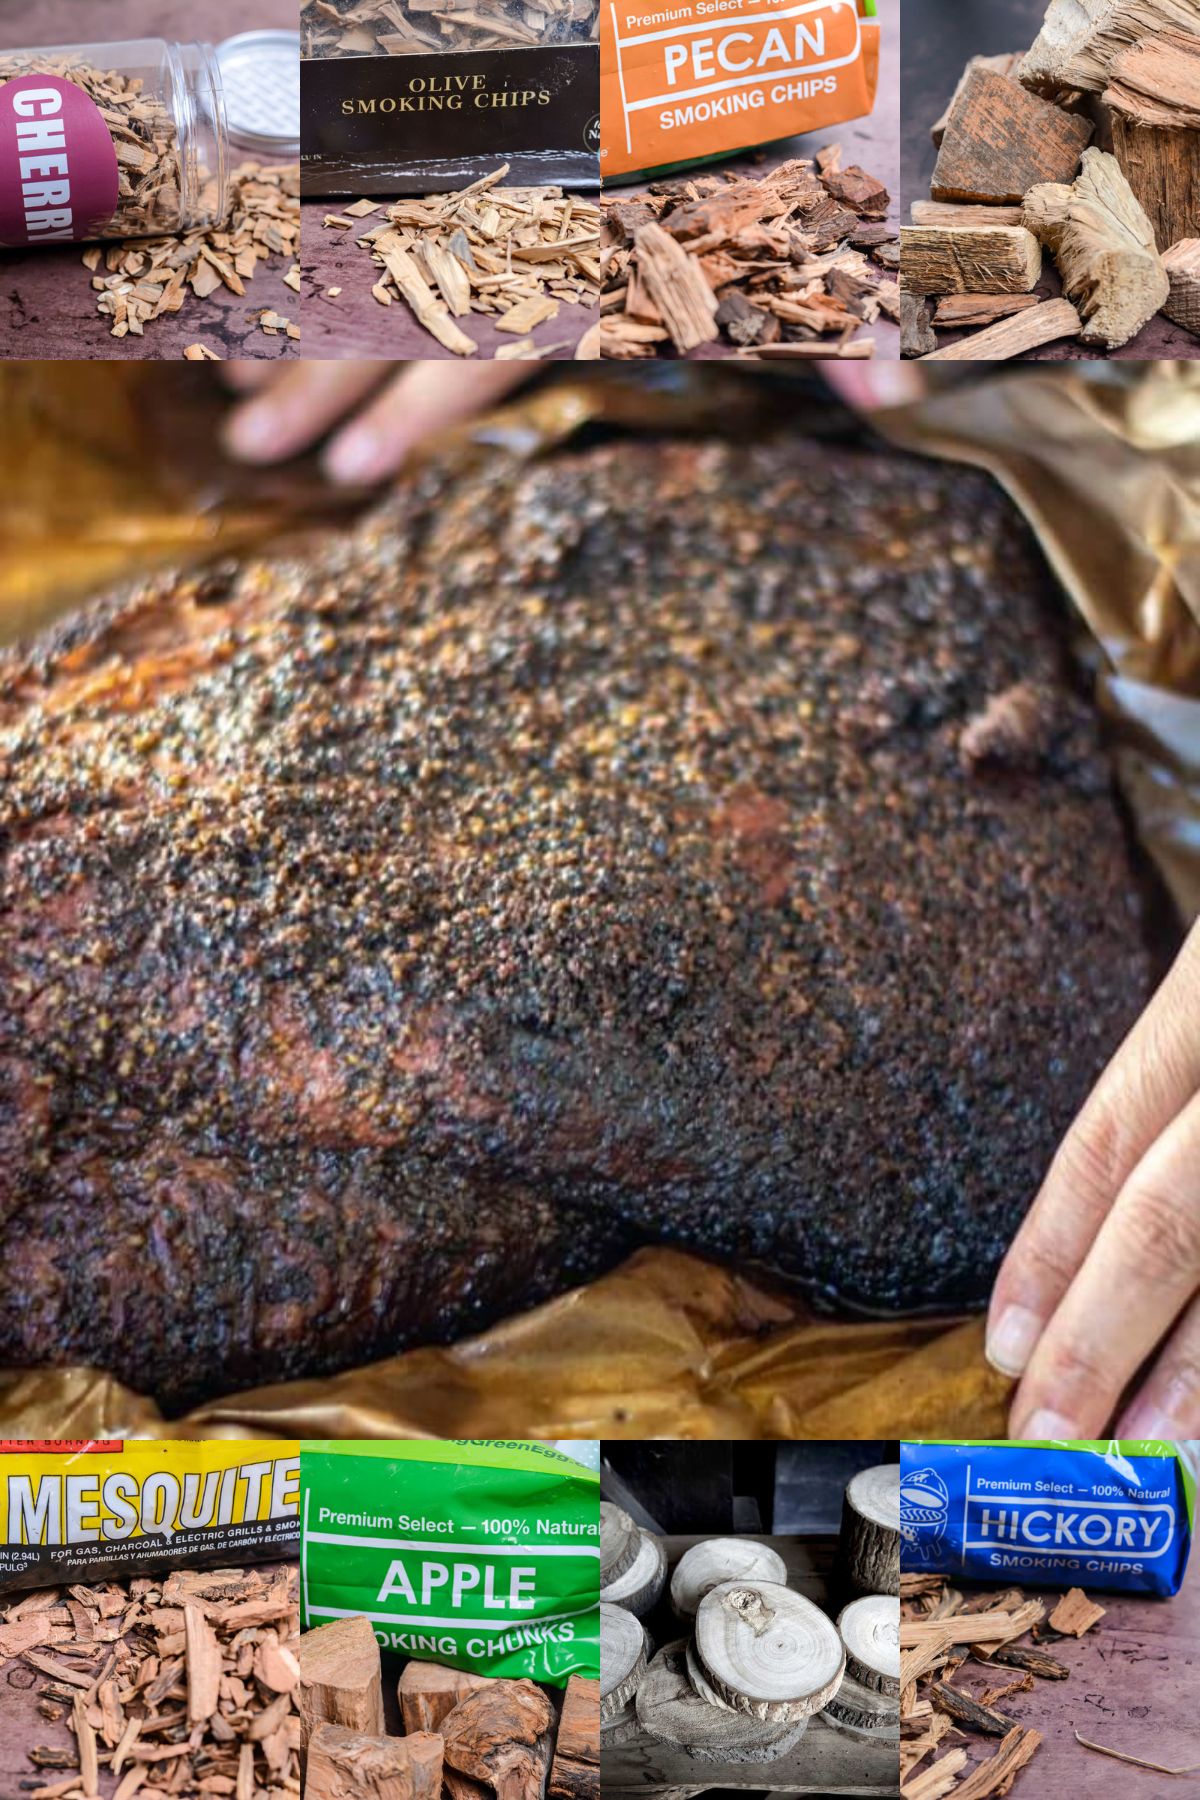 Images of smoked brisket and various types of smoking wood.